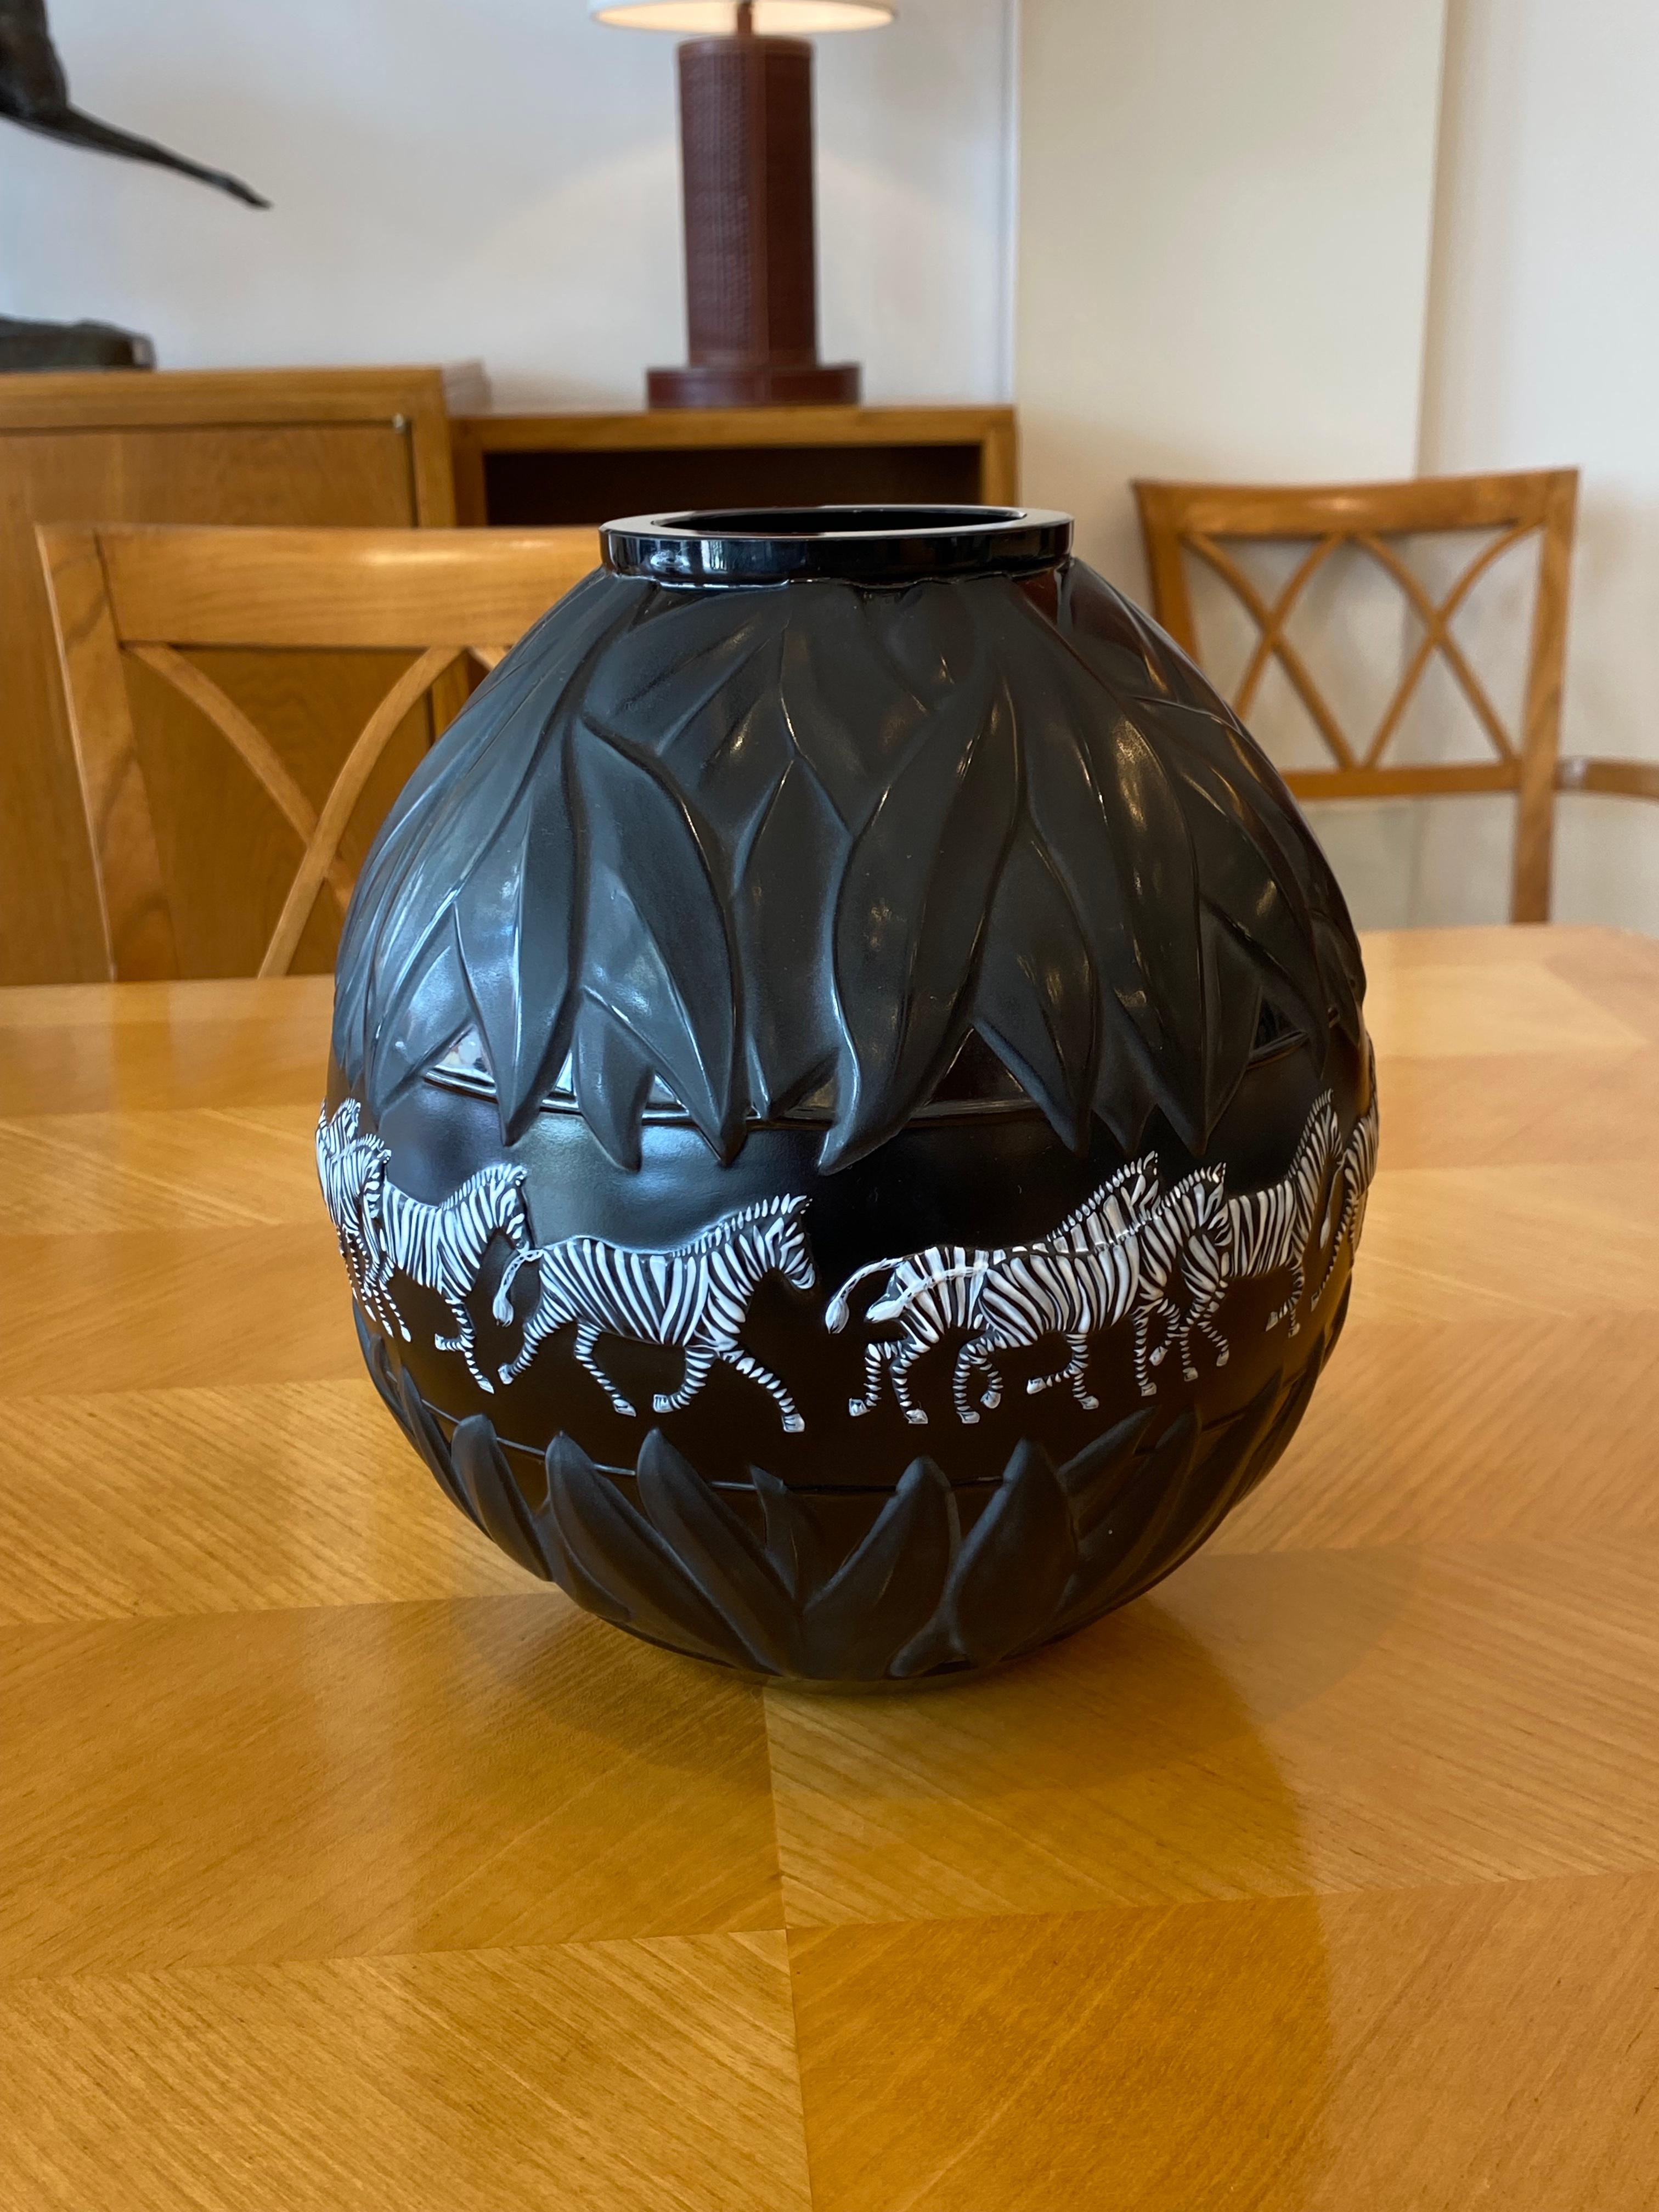 Lalique Tanzania black vase. Limited Edition. Signatured: France & Numbered 544 etched on base. Mouth blown molded black glass decorated in relief with hand painted center frieze of enameled black & white zebras. 
Made in France
Circa: